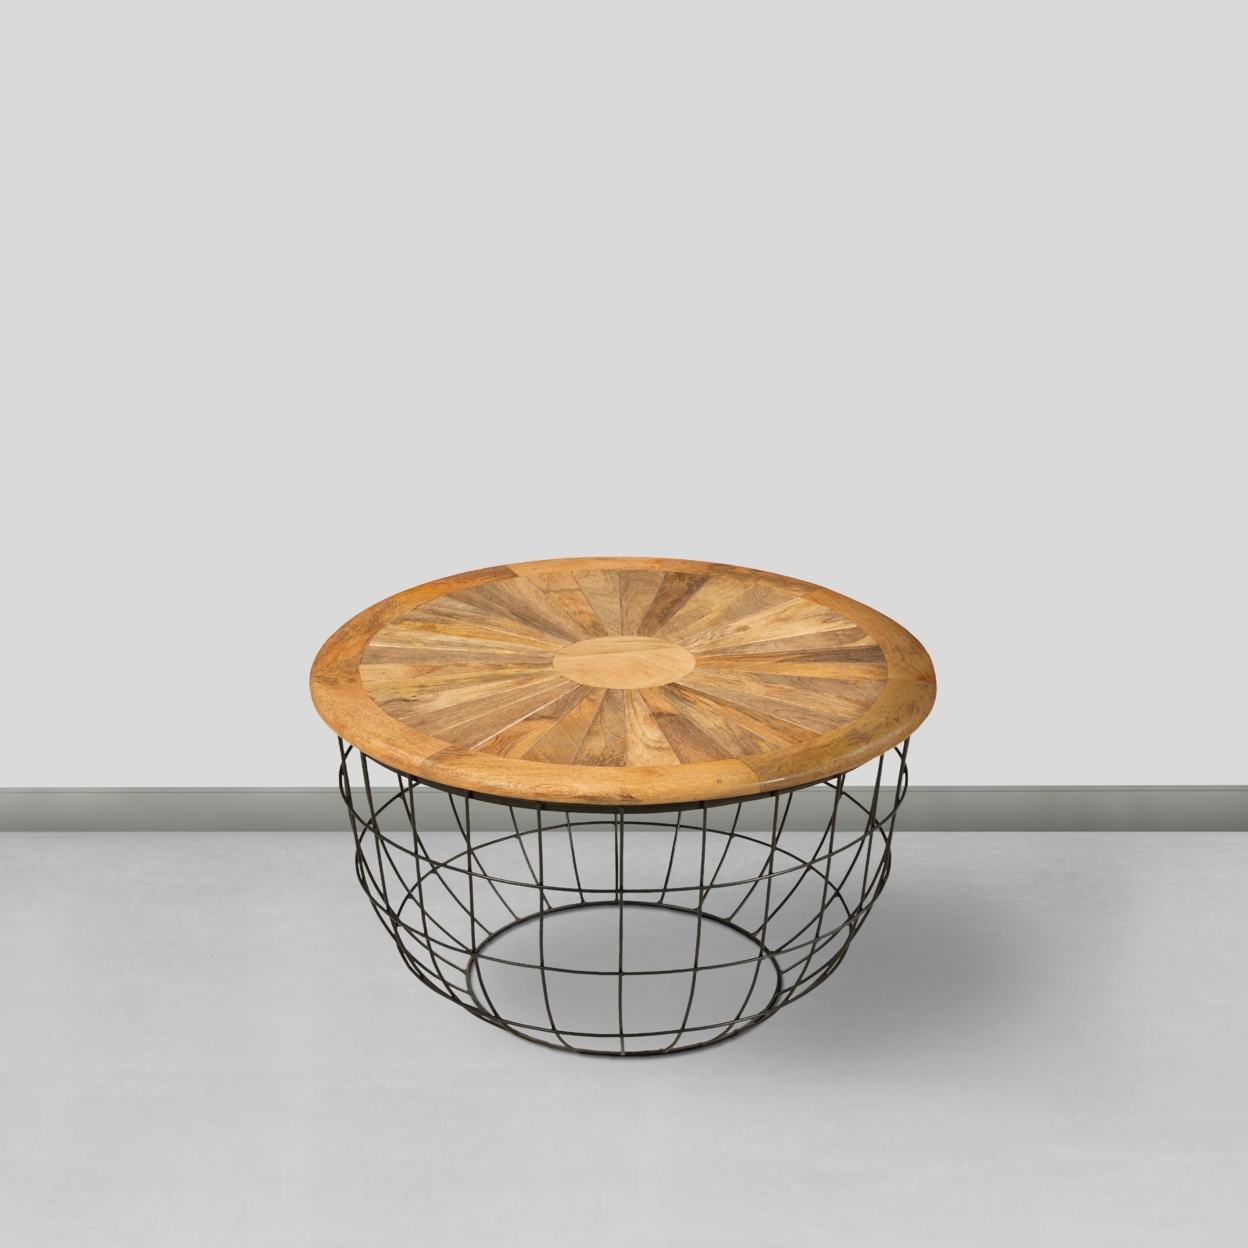 Round Mango Wood Coffee Table With Wooden Top And Nesting Basket Frame, Brown And Black- Saltoro Sherpi